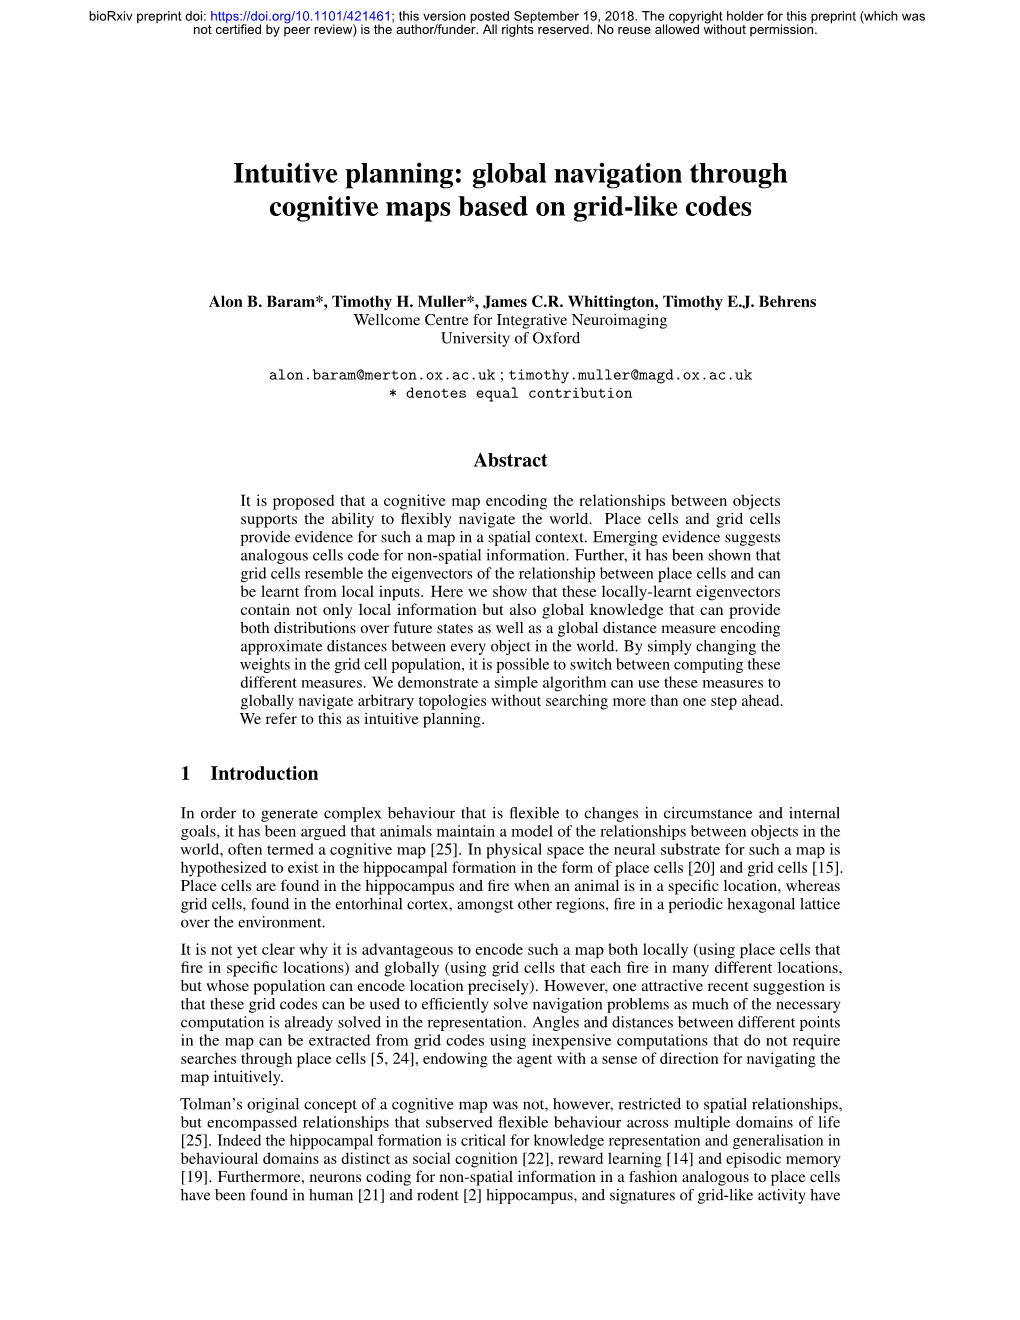 Intuitive Planning: Global Navigation Through Cognitive Maps Based on Grid-Like Codes